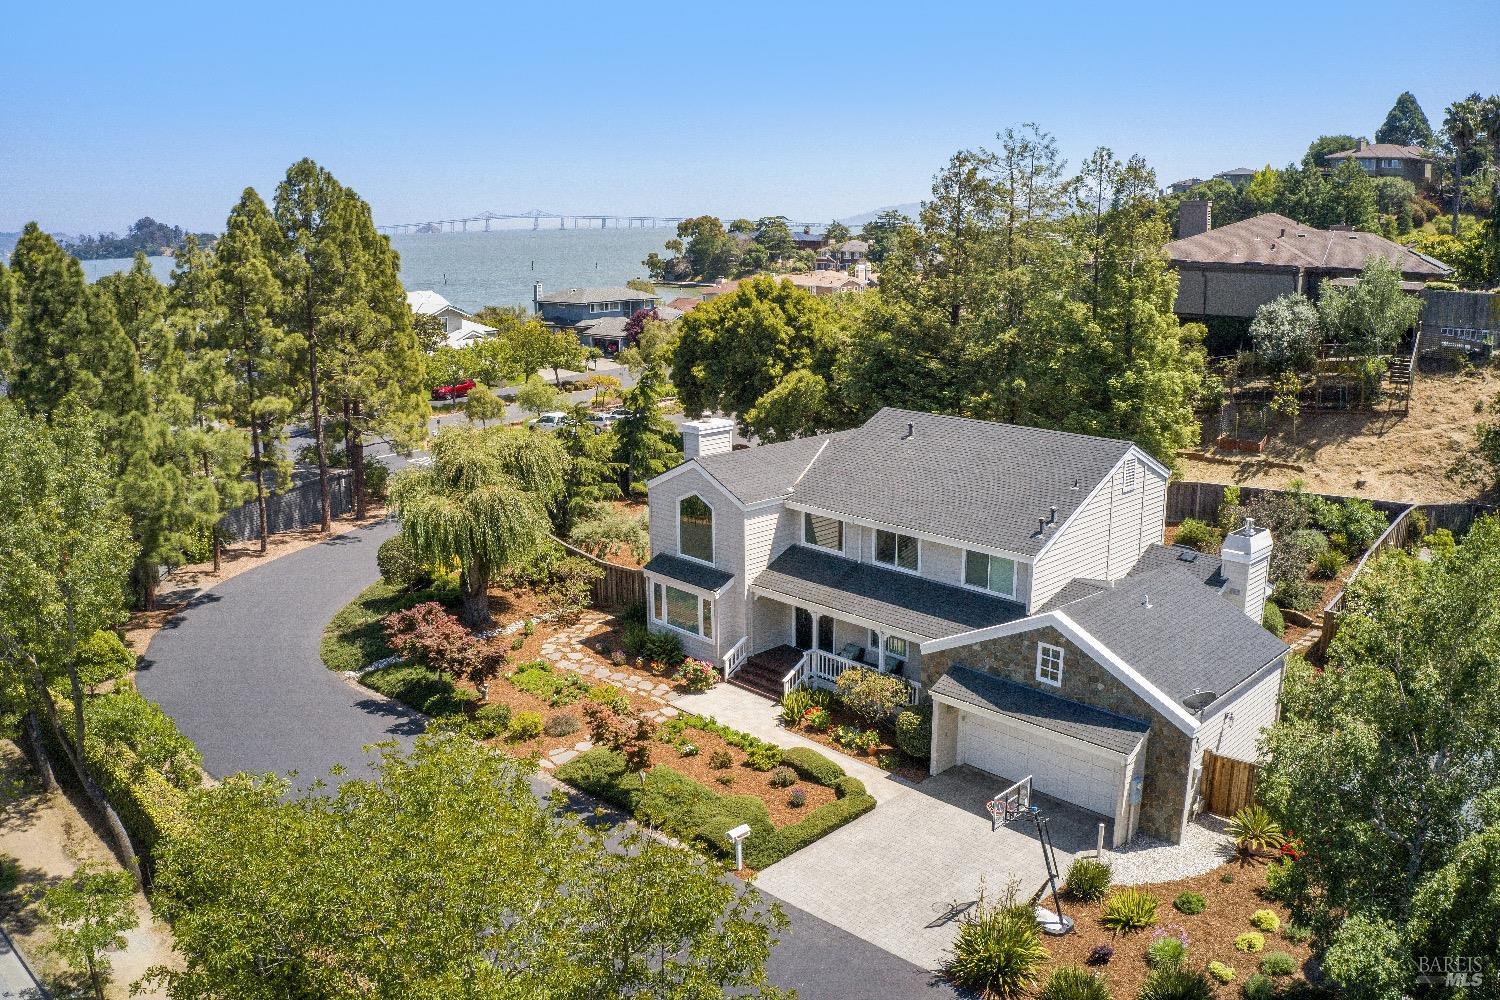 Welcome to magnificently remodeled 502 San Pedro Cove! This four bedroom and two and a half bathroom home is located within one of San Rafael's most prestigious gated communities. Completely renovated in 2016, the entire residence was expertly transformed into a work of art with approximately $500,000 in top-of-the-line improvements. Breathtaking vaulted ceilings, a gorgeous chef's kitchen with Bosch appliances, quartz countertops throughout, custom cabinets, new flooring, Andersen doors, new windows, and central A/C are among the many upgrades.   The home is within the bounds of award-winning Glenwood elementary, one of the most sought after elementary schools in the county.  Enjoy fun summer barbecues in the fully fenced-private backyard with an all new retaining wall, pavers, new irrigation system and over 50+ newly planted flowers and bushes. Step outside into a neighborhood clubhouse for gatherings with friends and family in the cabana, laps in the pool or a relaxing soak in the hot tub.  Embrace the outdoors as you traverse a nearby bike path, marvel at tranquil views of the Loch Lomond Marina, and its surrounding wildlife.